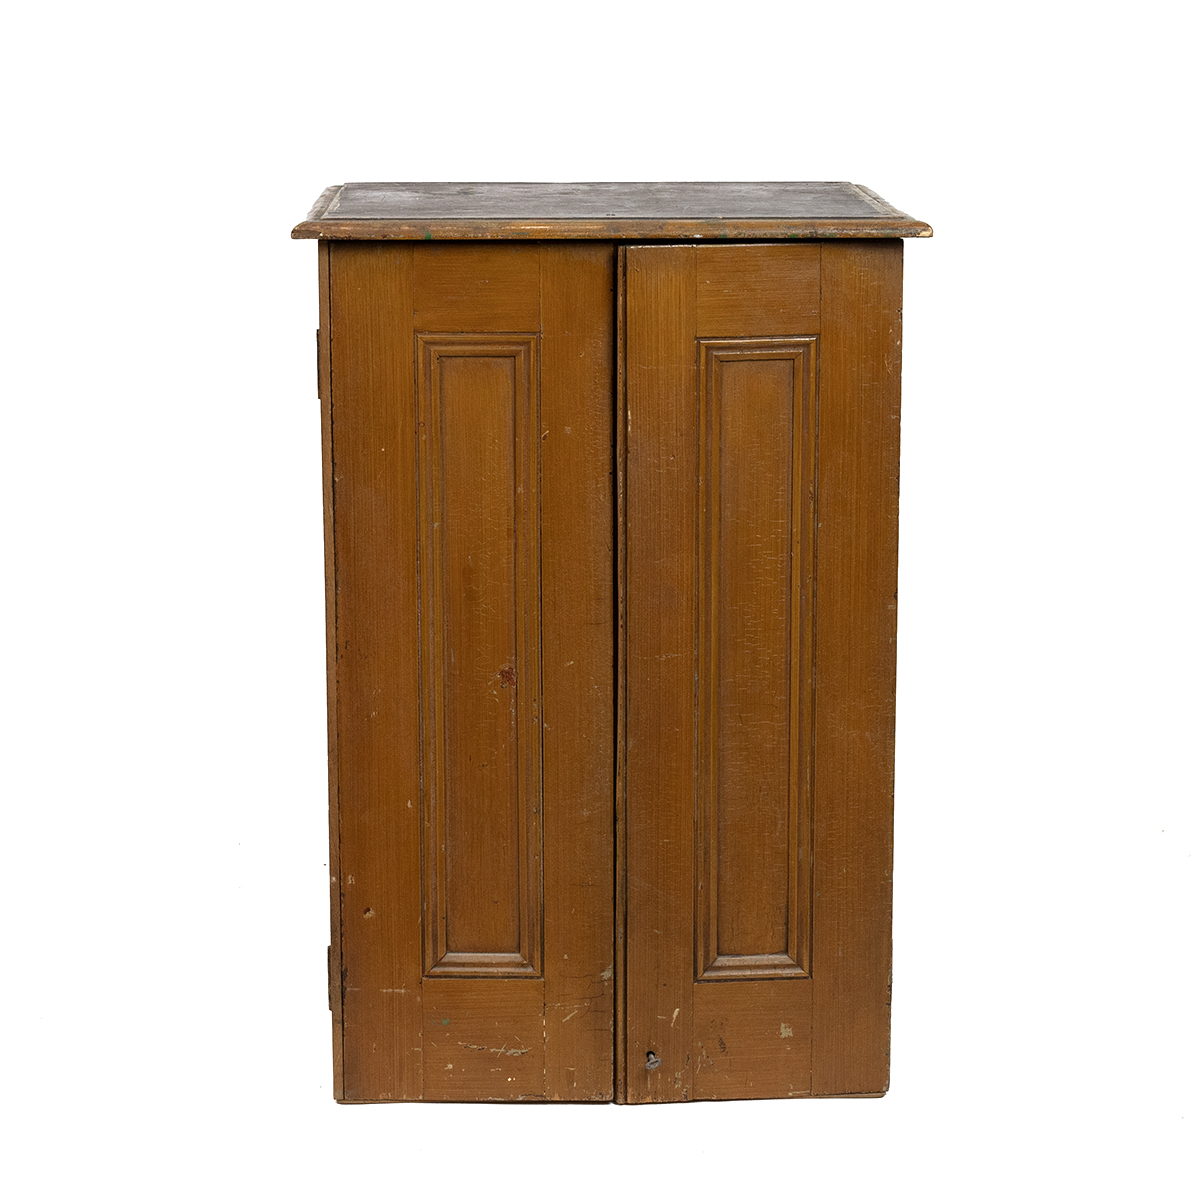 Early 20th Century pine haberdasher's cabinet with lockable panel doors opening to reveal 18 draw... - Image 2 of 4